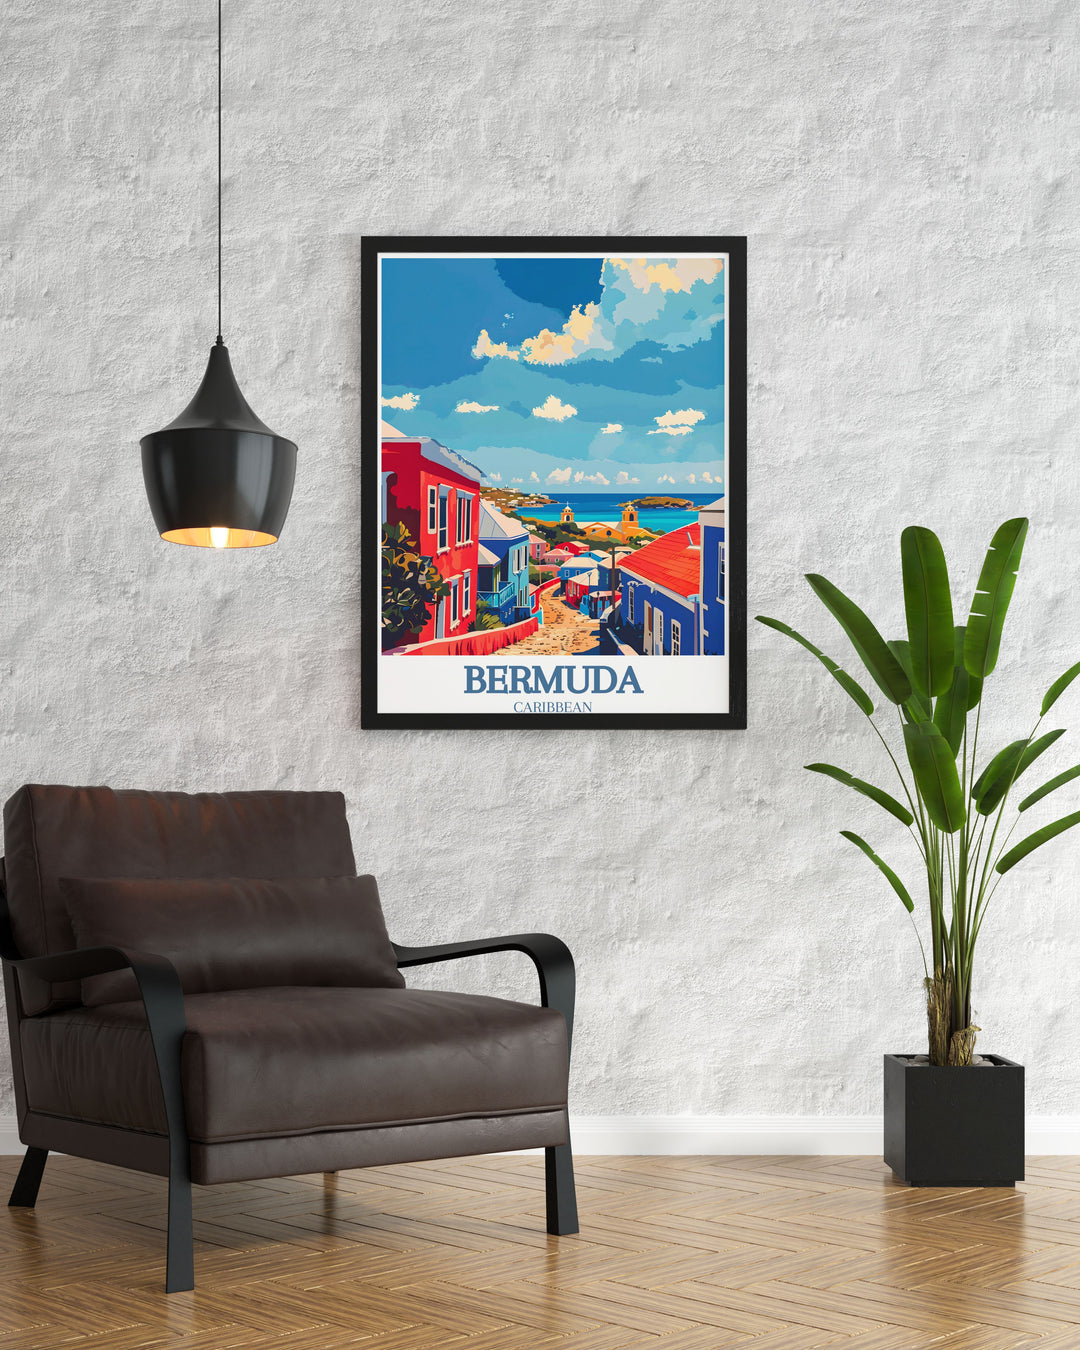 Detailed digital download of Bermudas Royal Naval Dockyard and Clocktower Mall, ideal for any art collection or as a memorable travel keepsake. Enhances your home with Bermudas historic charm.